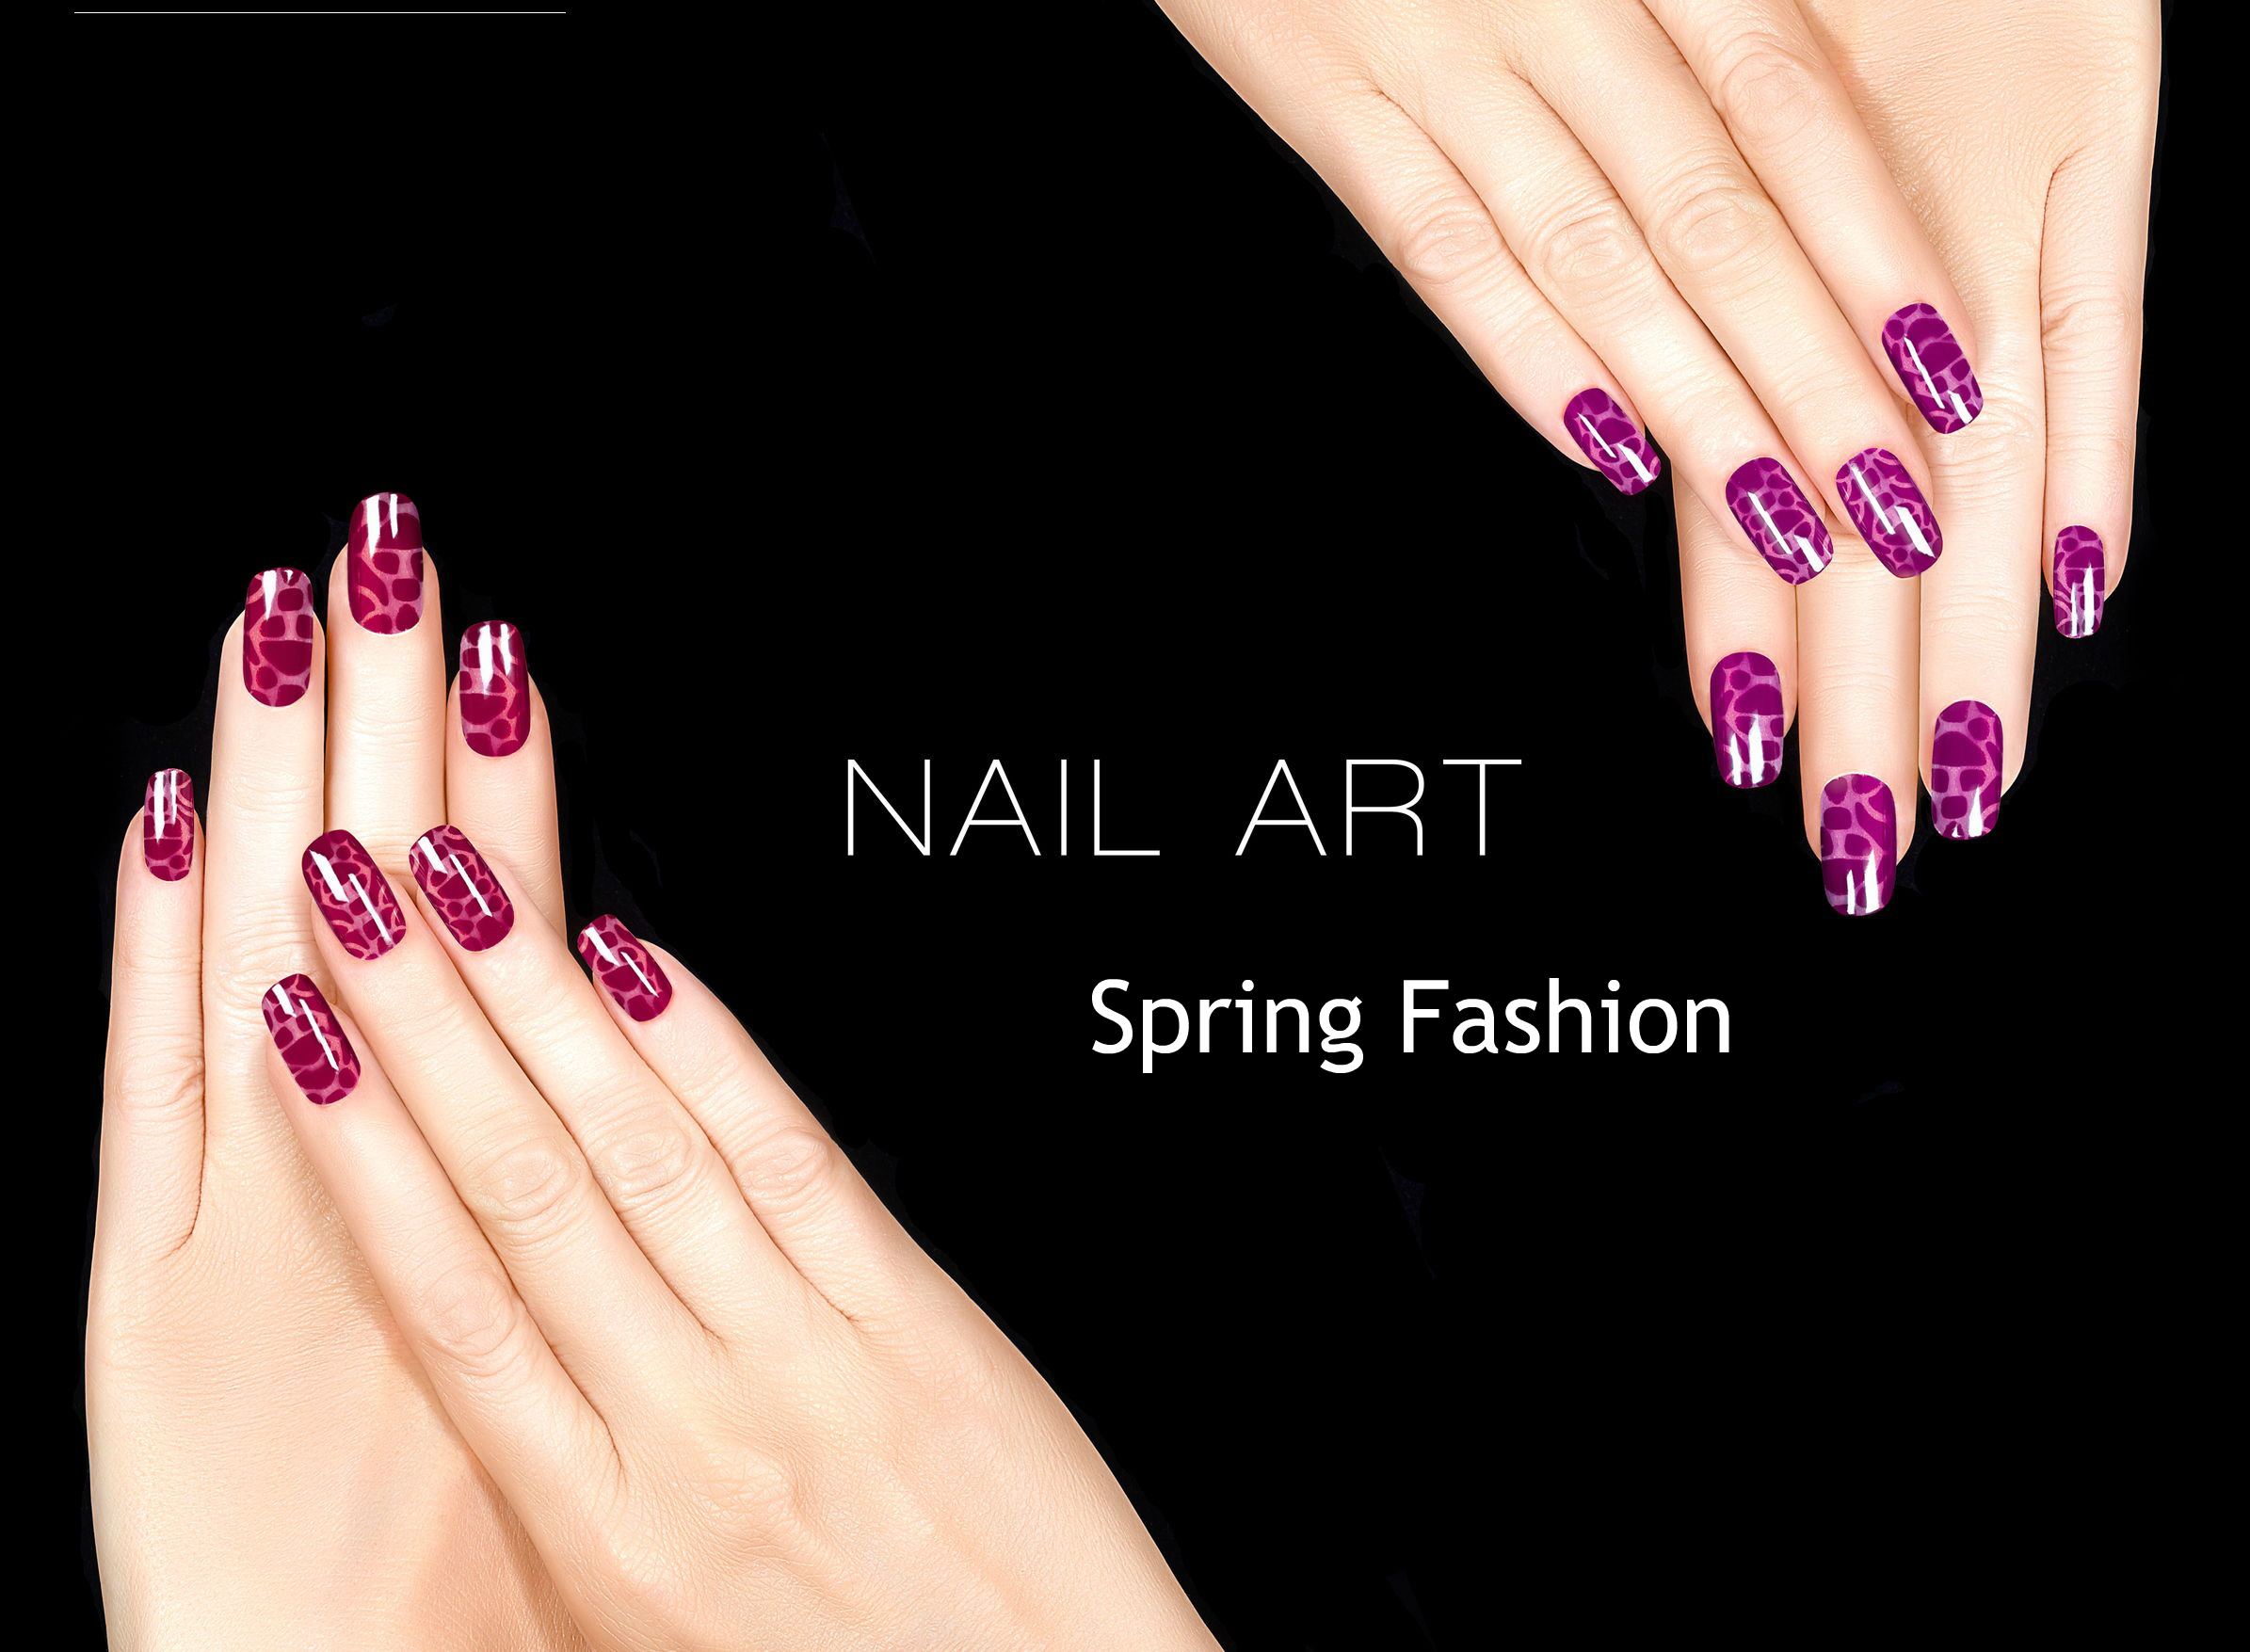 Nail Trends For Your Chic Spring Look!